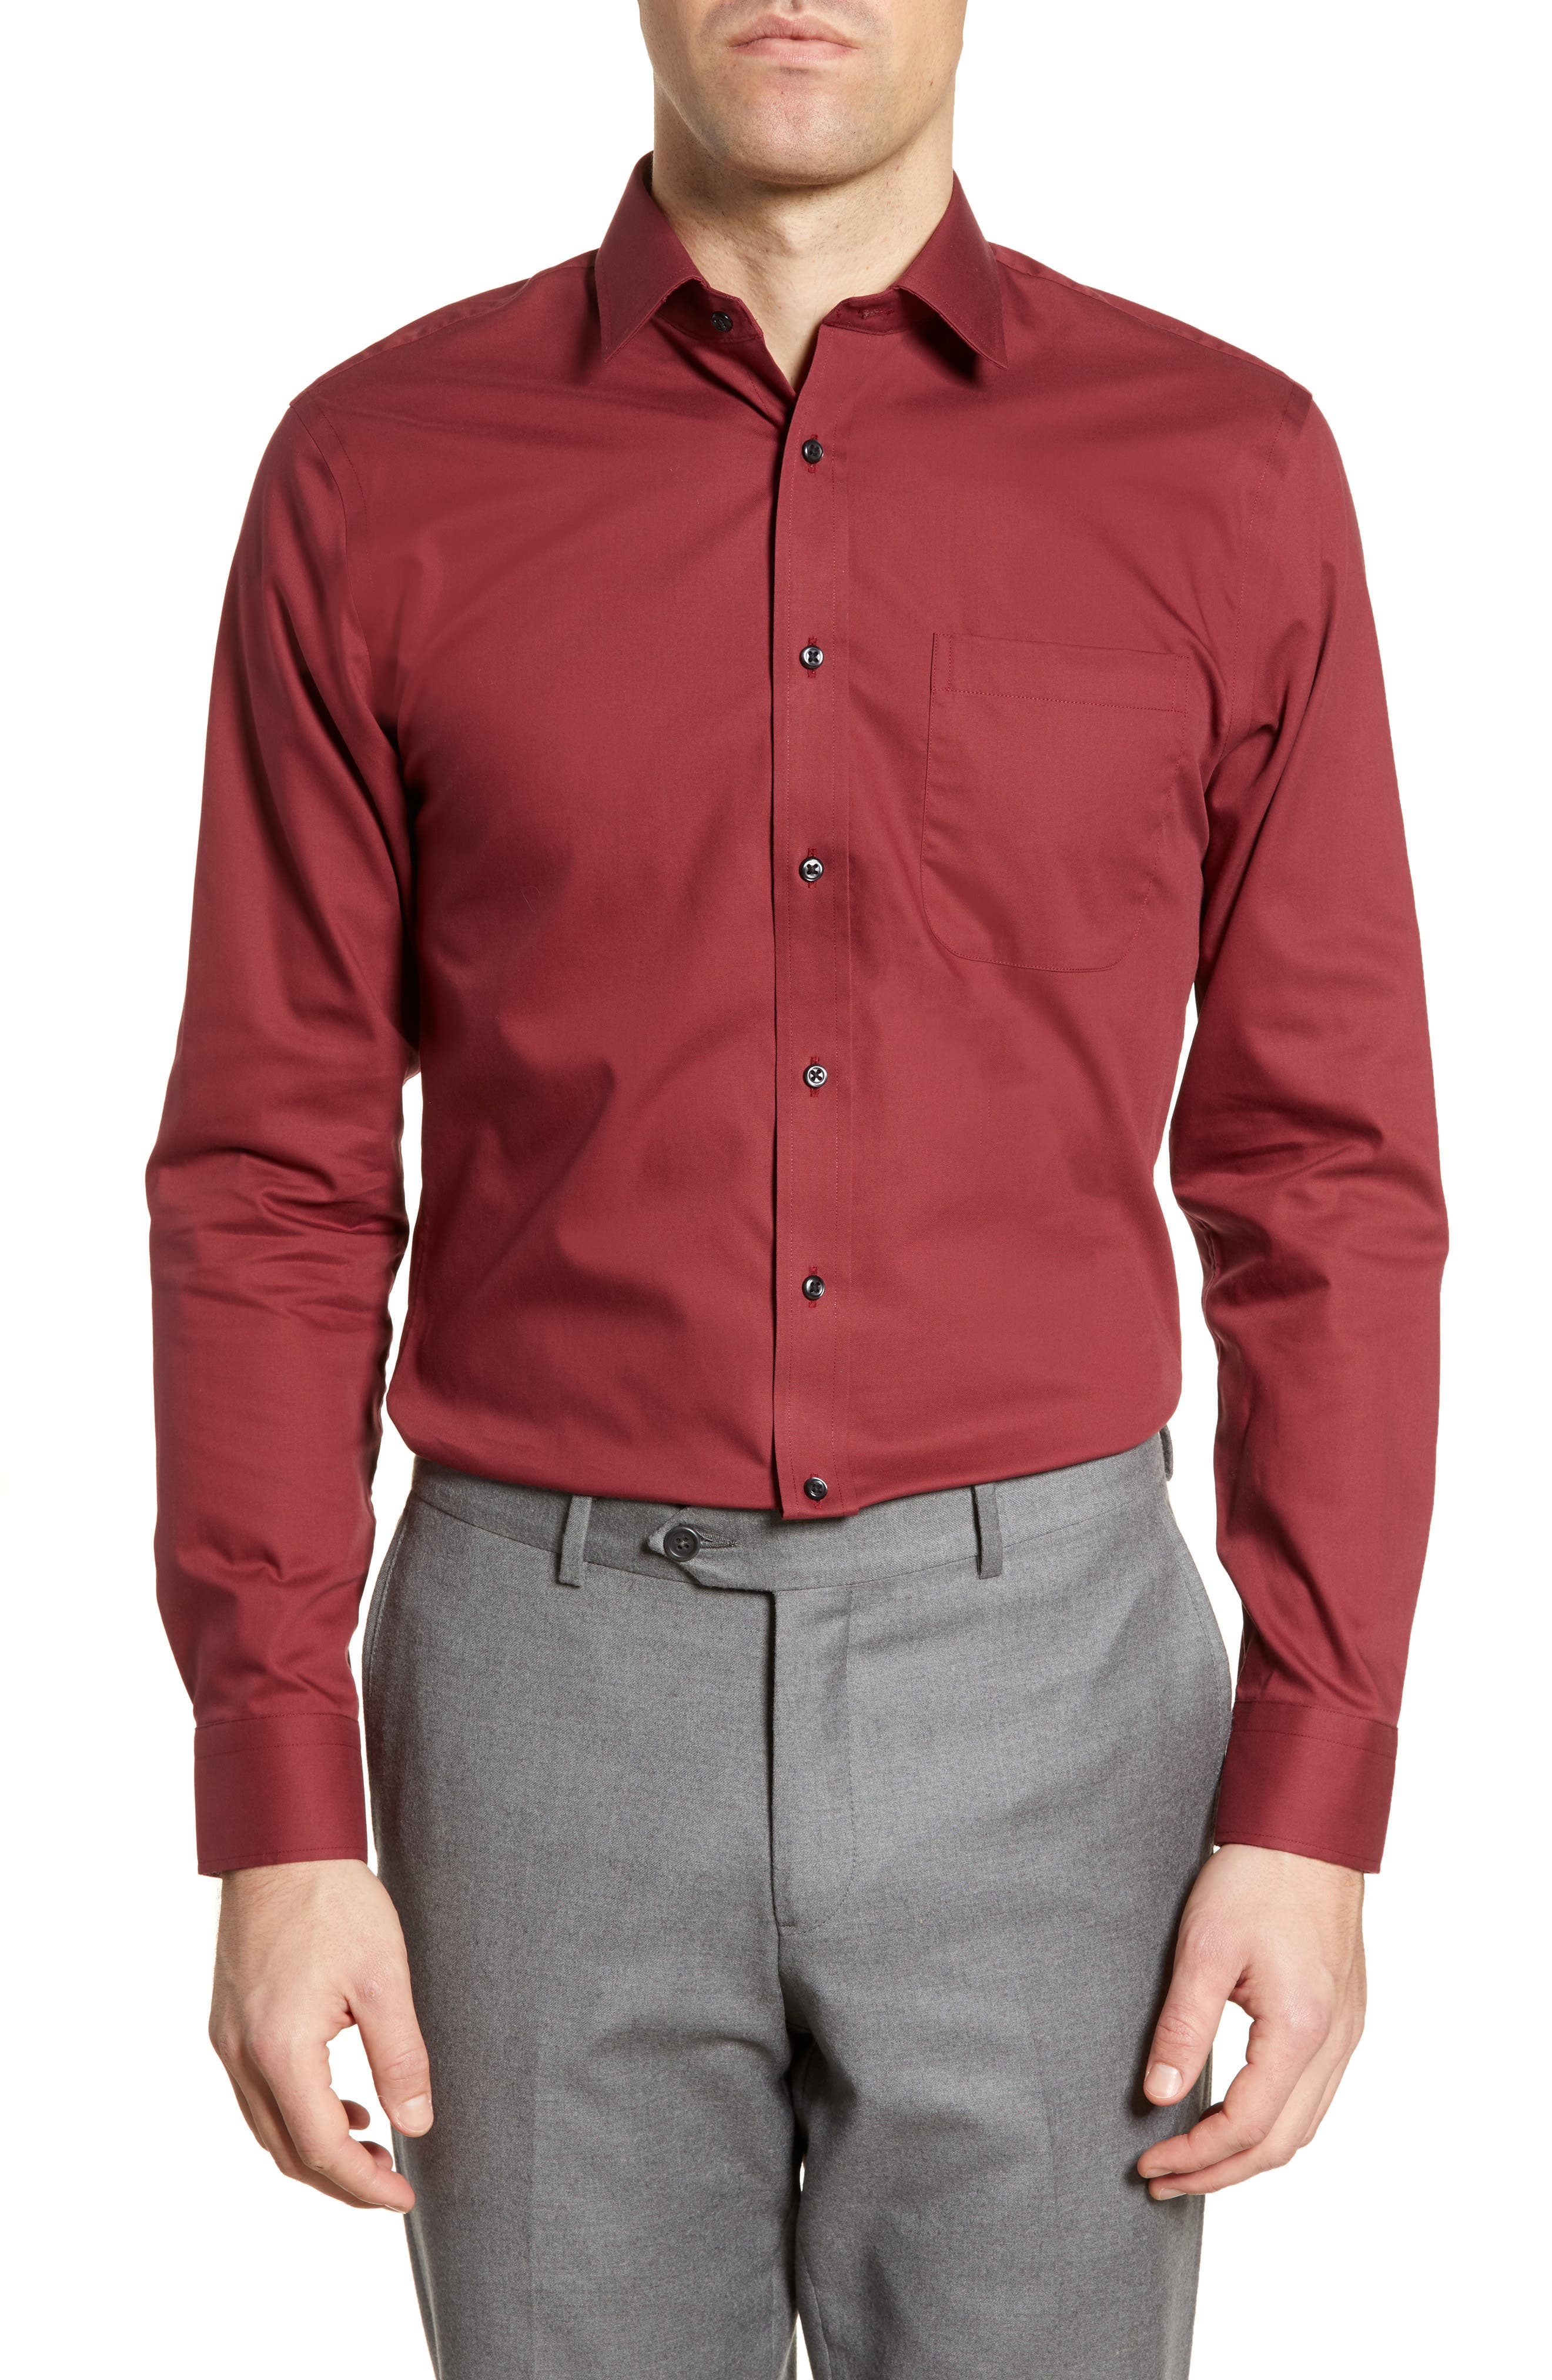 red shirt outfit for men